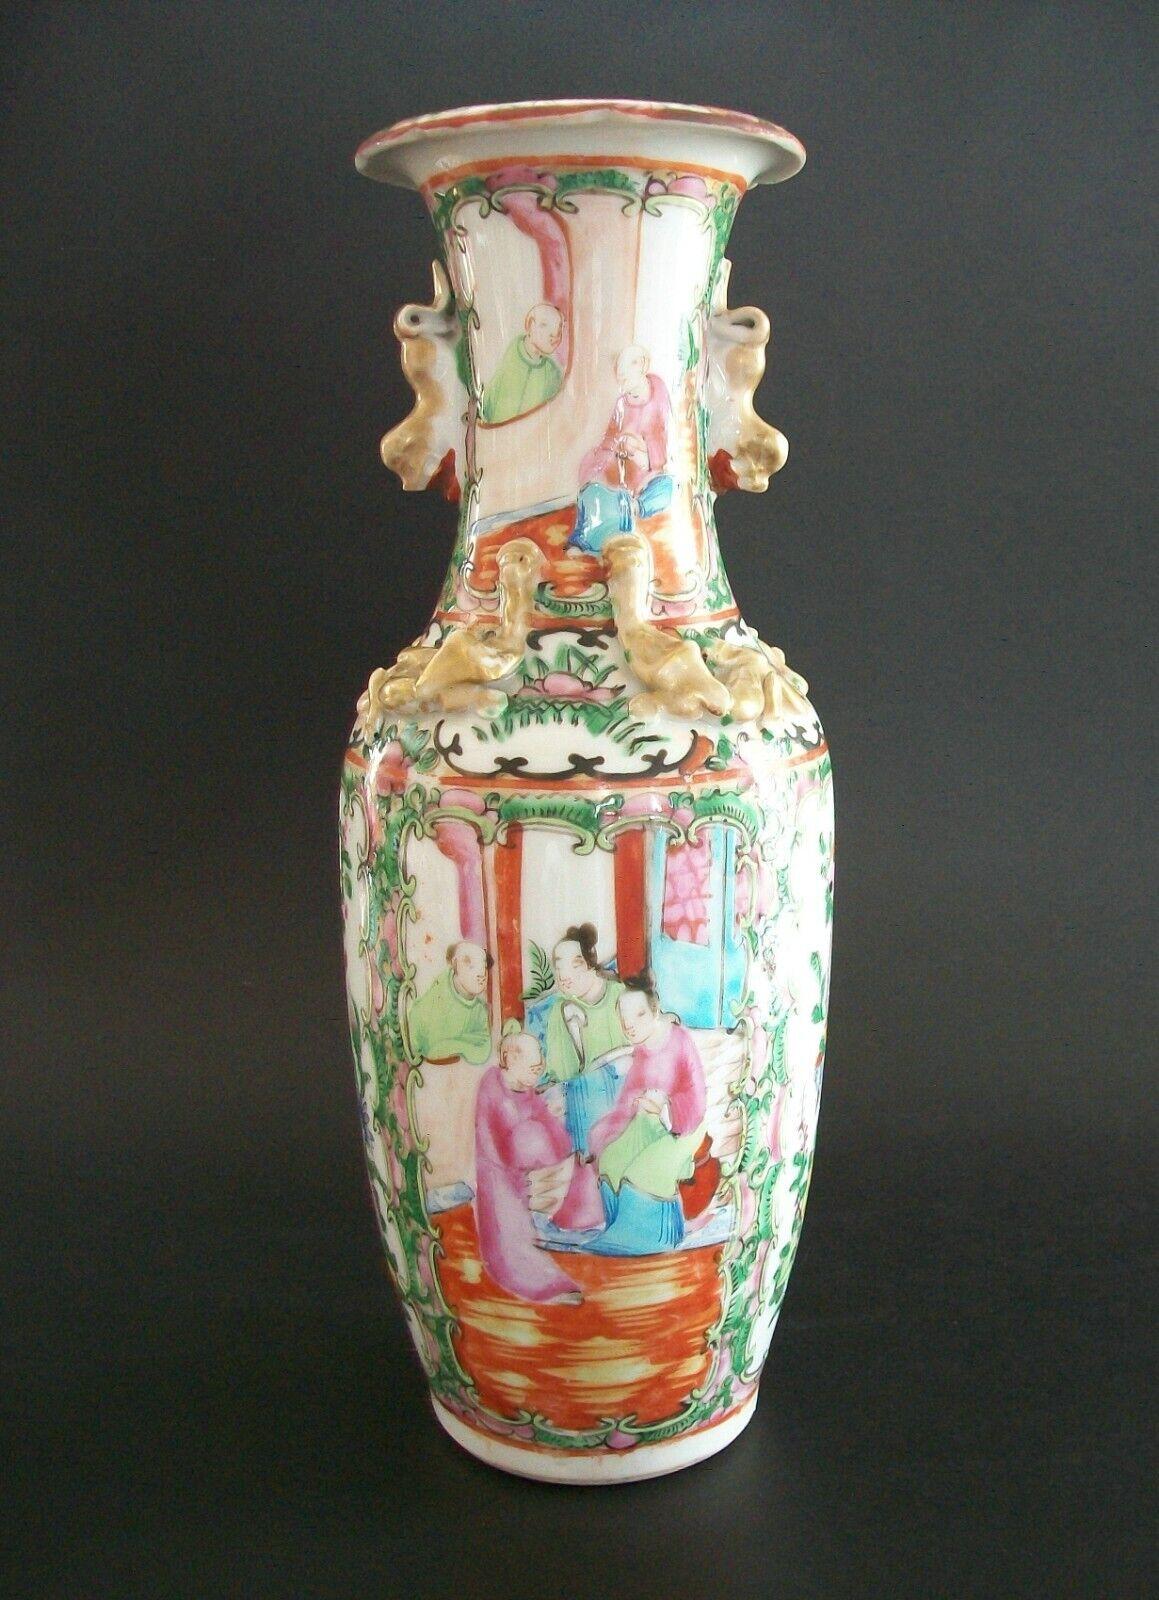 Antique 'famille rose' (also referred to as 'rose medallion') porcelain vase - hand painted with enamels of a courtyard scene - floral and foliate borders - gilt decorated applied figures to the shoulder and handles to the neck - unsigned - China -